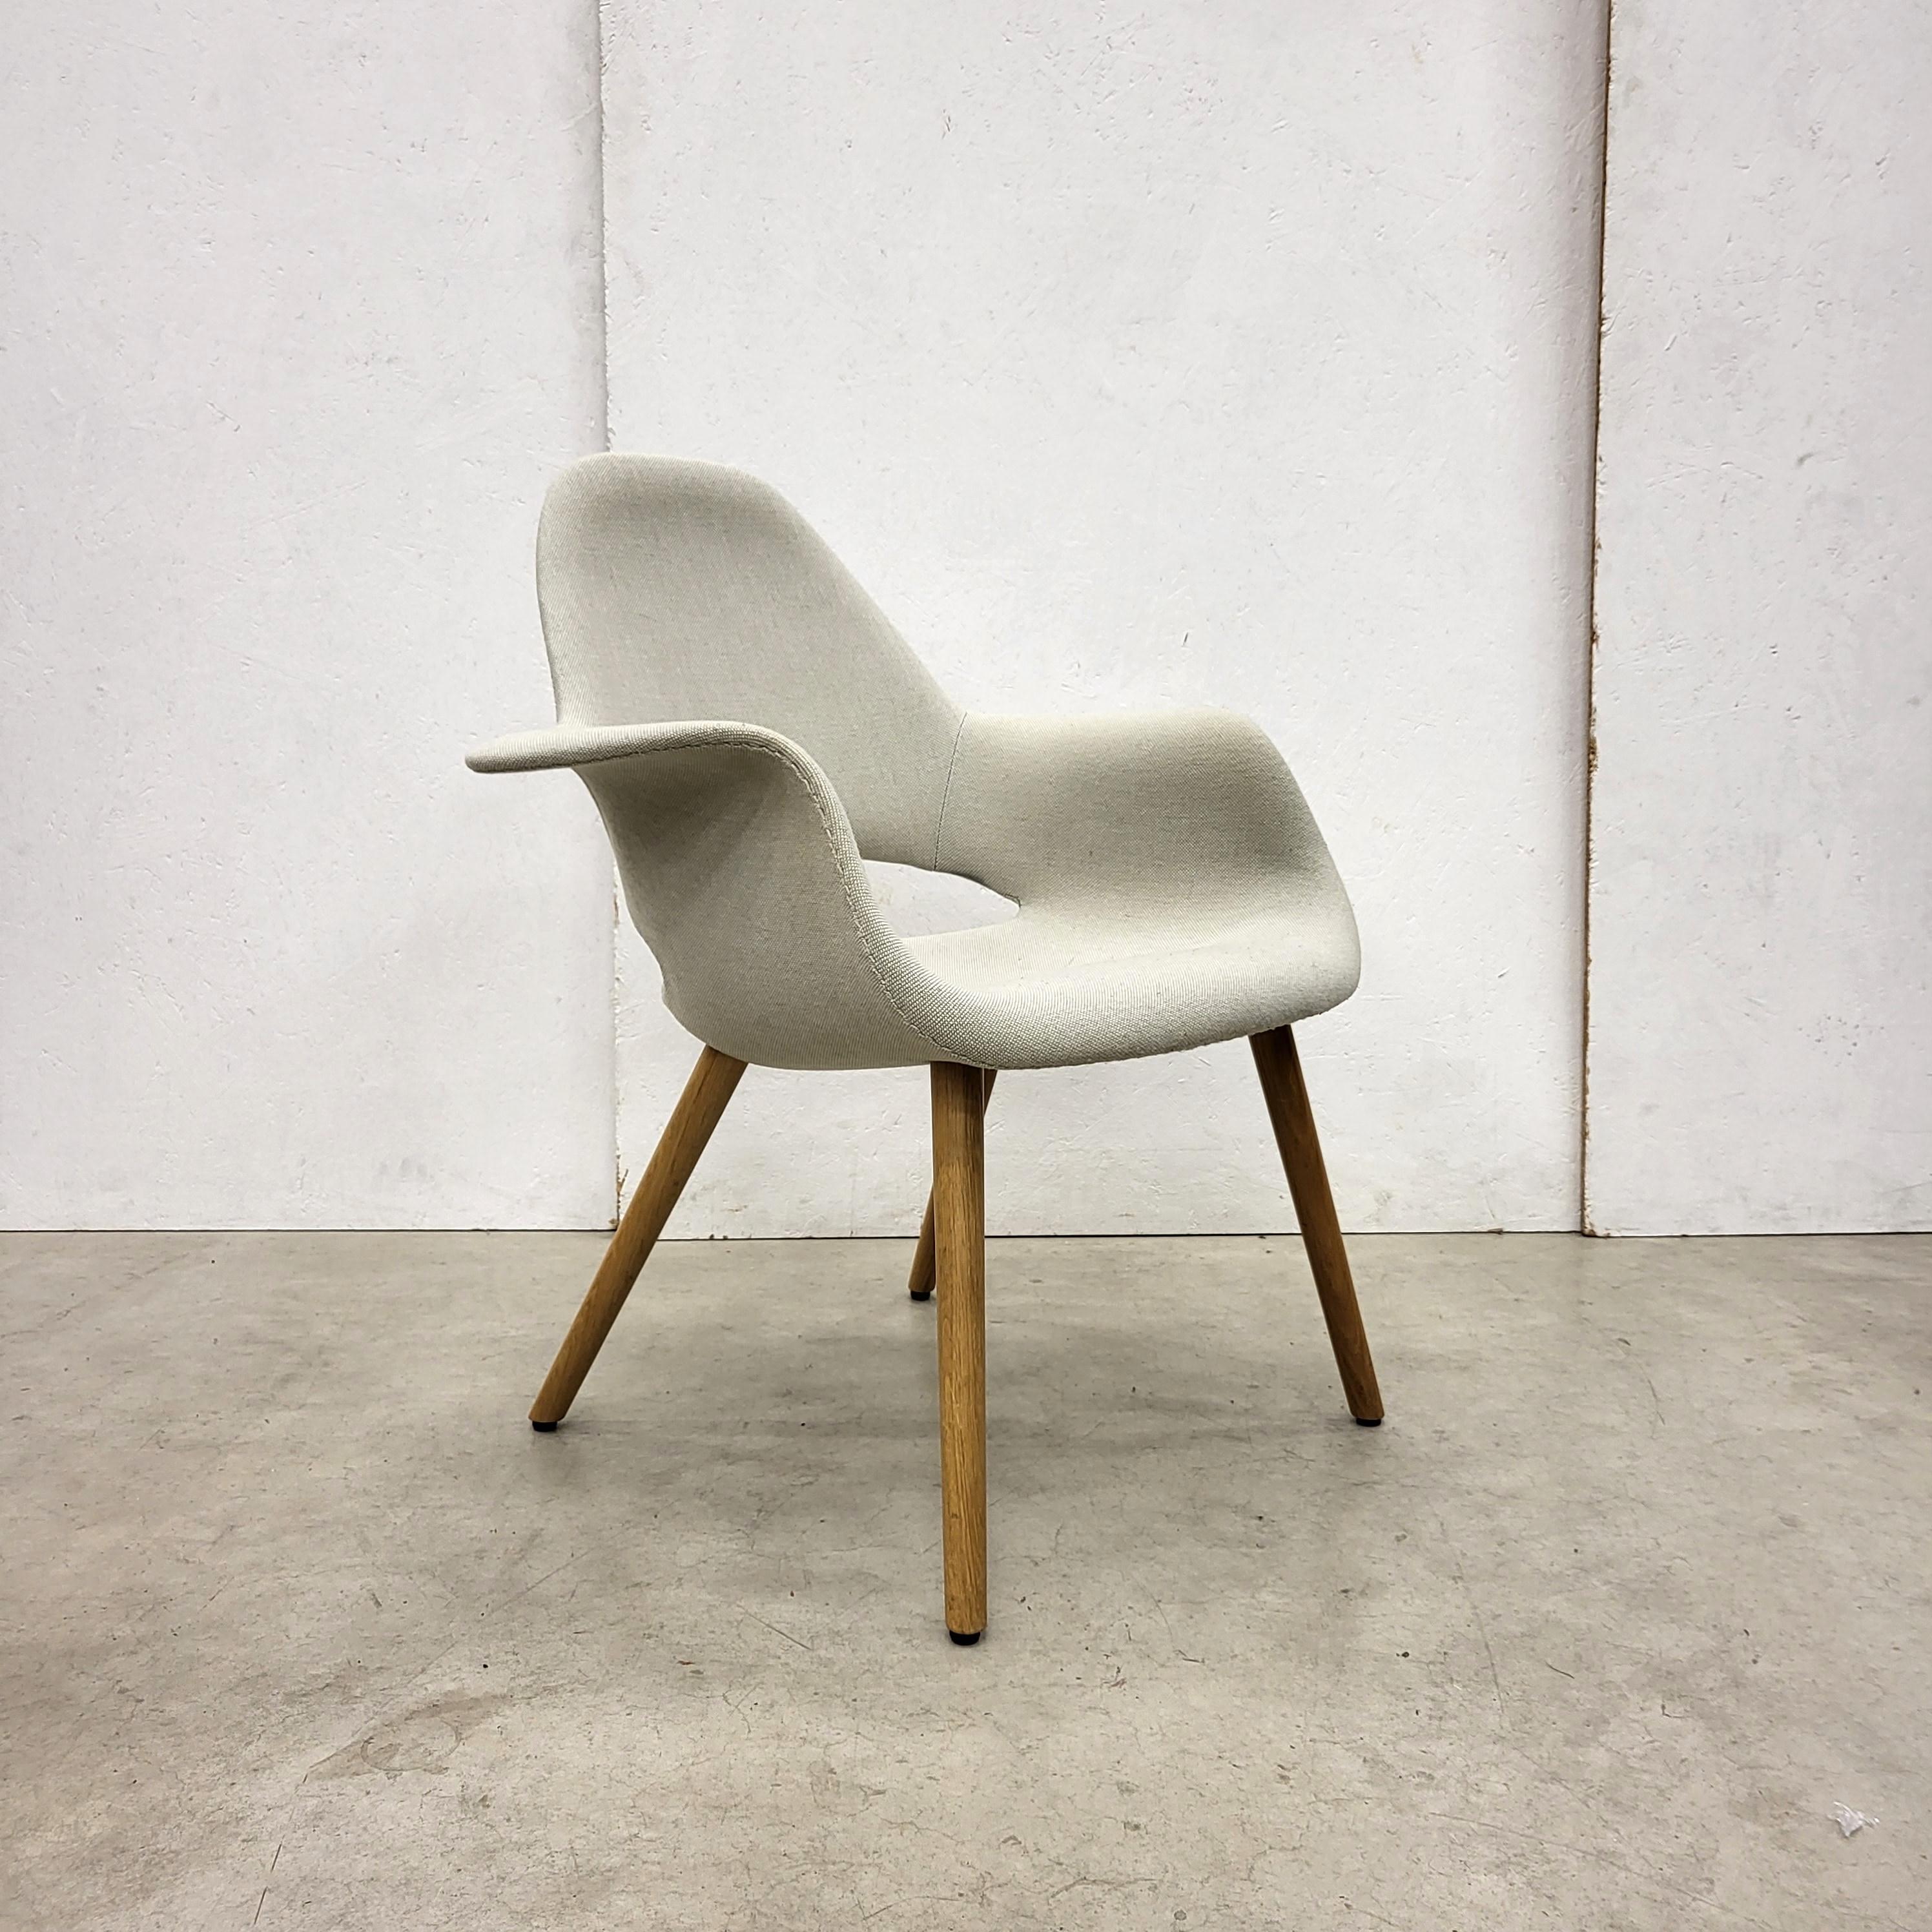 Set of 6x vitra organic chairs designed by Eero Saarinen and Charles Eames.
Initiated by Elliot Noyes, Eames and Saarinen designed the Organic chair for the Organic Design competition by Museum of Modern Art in New York on 1 October 1940. 

Their